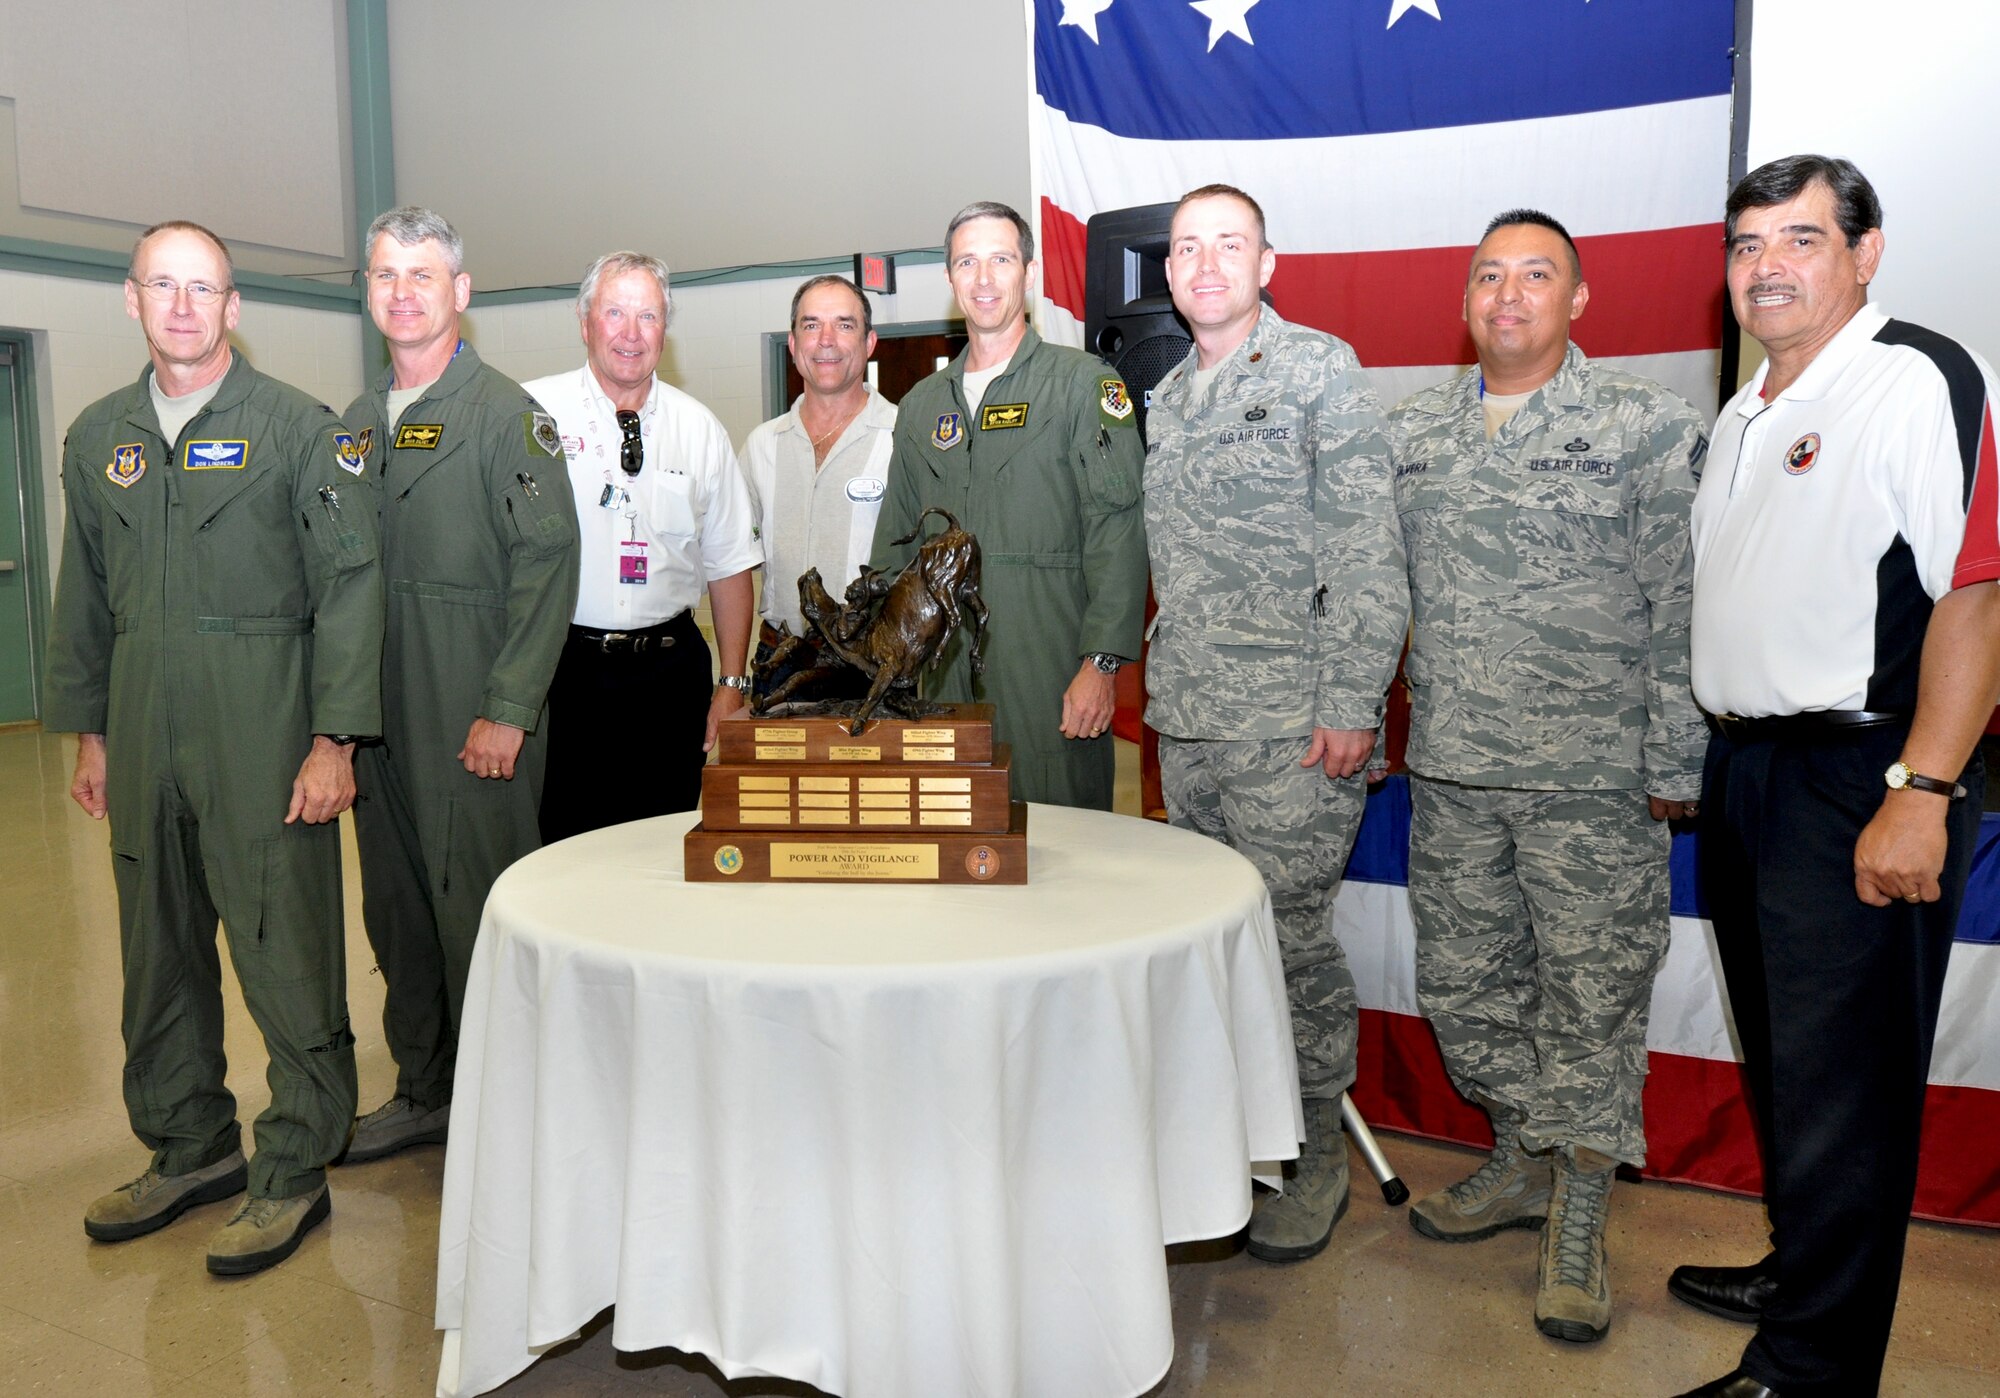 Colonel Donald Lindberg, 10th Air Force vice commander,  members of the 419th Fighter Wing and Airpower Foundation chairman, Roman Palomares, pose with the Power and Vigilance trophy. The 419th Fighter Wing at Hill Air Force Base, Utah, was recently proclaimed the premier unit within 10th Air Force, winning trophy bragging rights for the year. The Power and Vigilance Award is presented annually to the 10 AF Reserve unit that exhibits the NAF mission as "the premier provider of affordable, integrated, flexible, and mission-ready Citizen Airmen to execute power and vigilance missions in support of U.S. National Security.” The symbolism of the bronze figure on the award says it all, ‘grabbing the bull by the horns’.  They are only the fifth unit to hold this honor. (U.S. Air Force photo/Master Sgt. Julie Briden-Garcia)